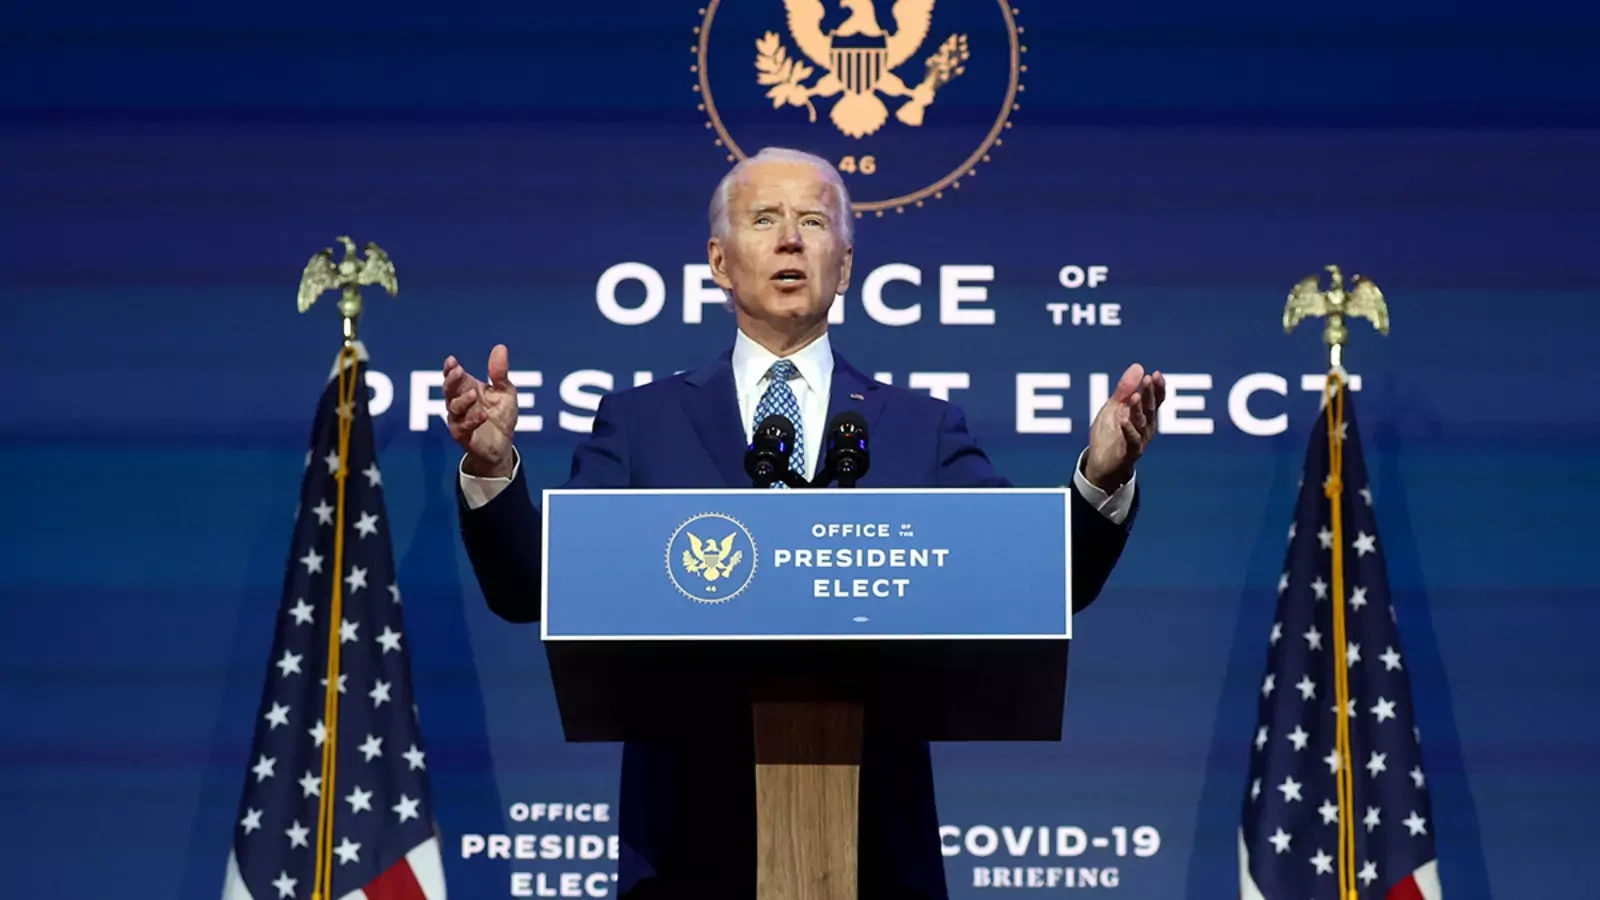 President-Elect Joe Biden speaks to reporters about efforts to combat the COVID-19 pandemic.